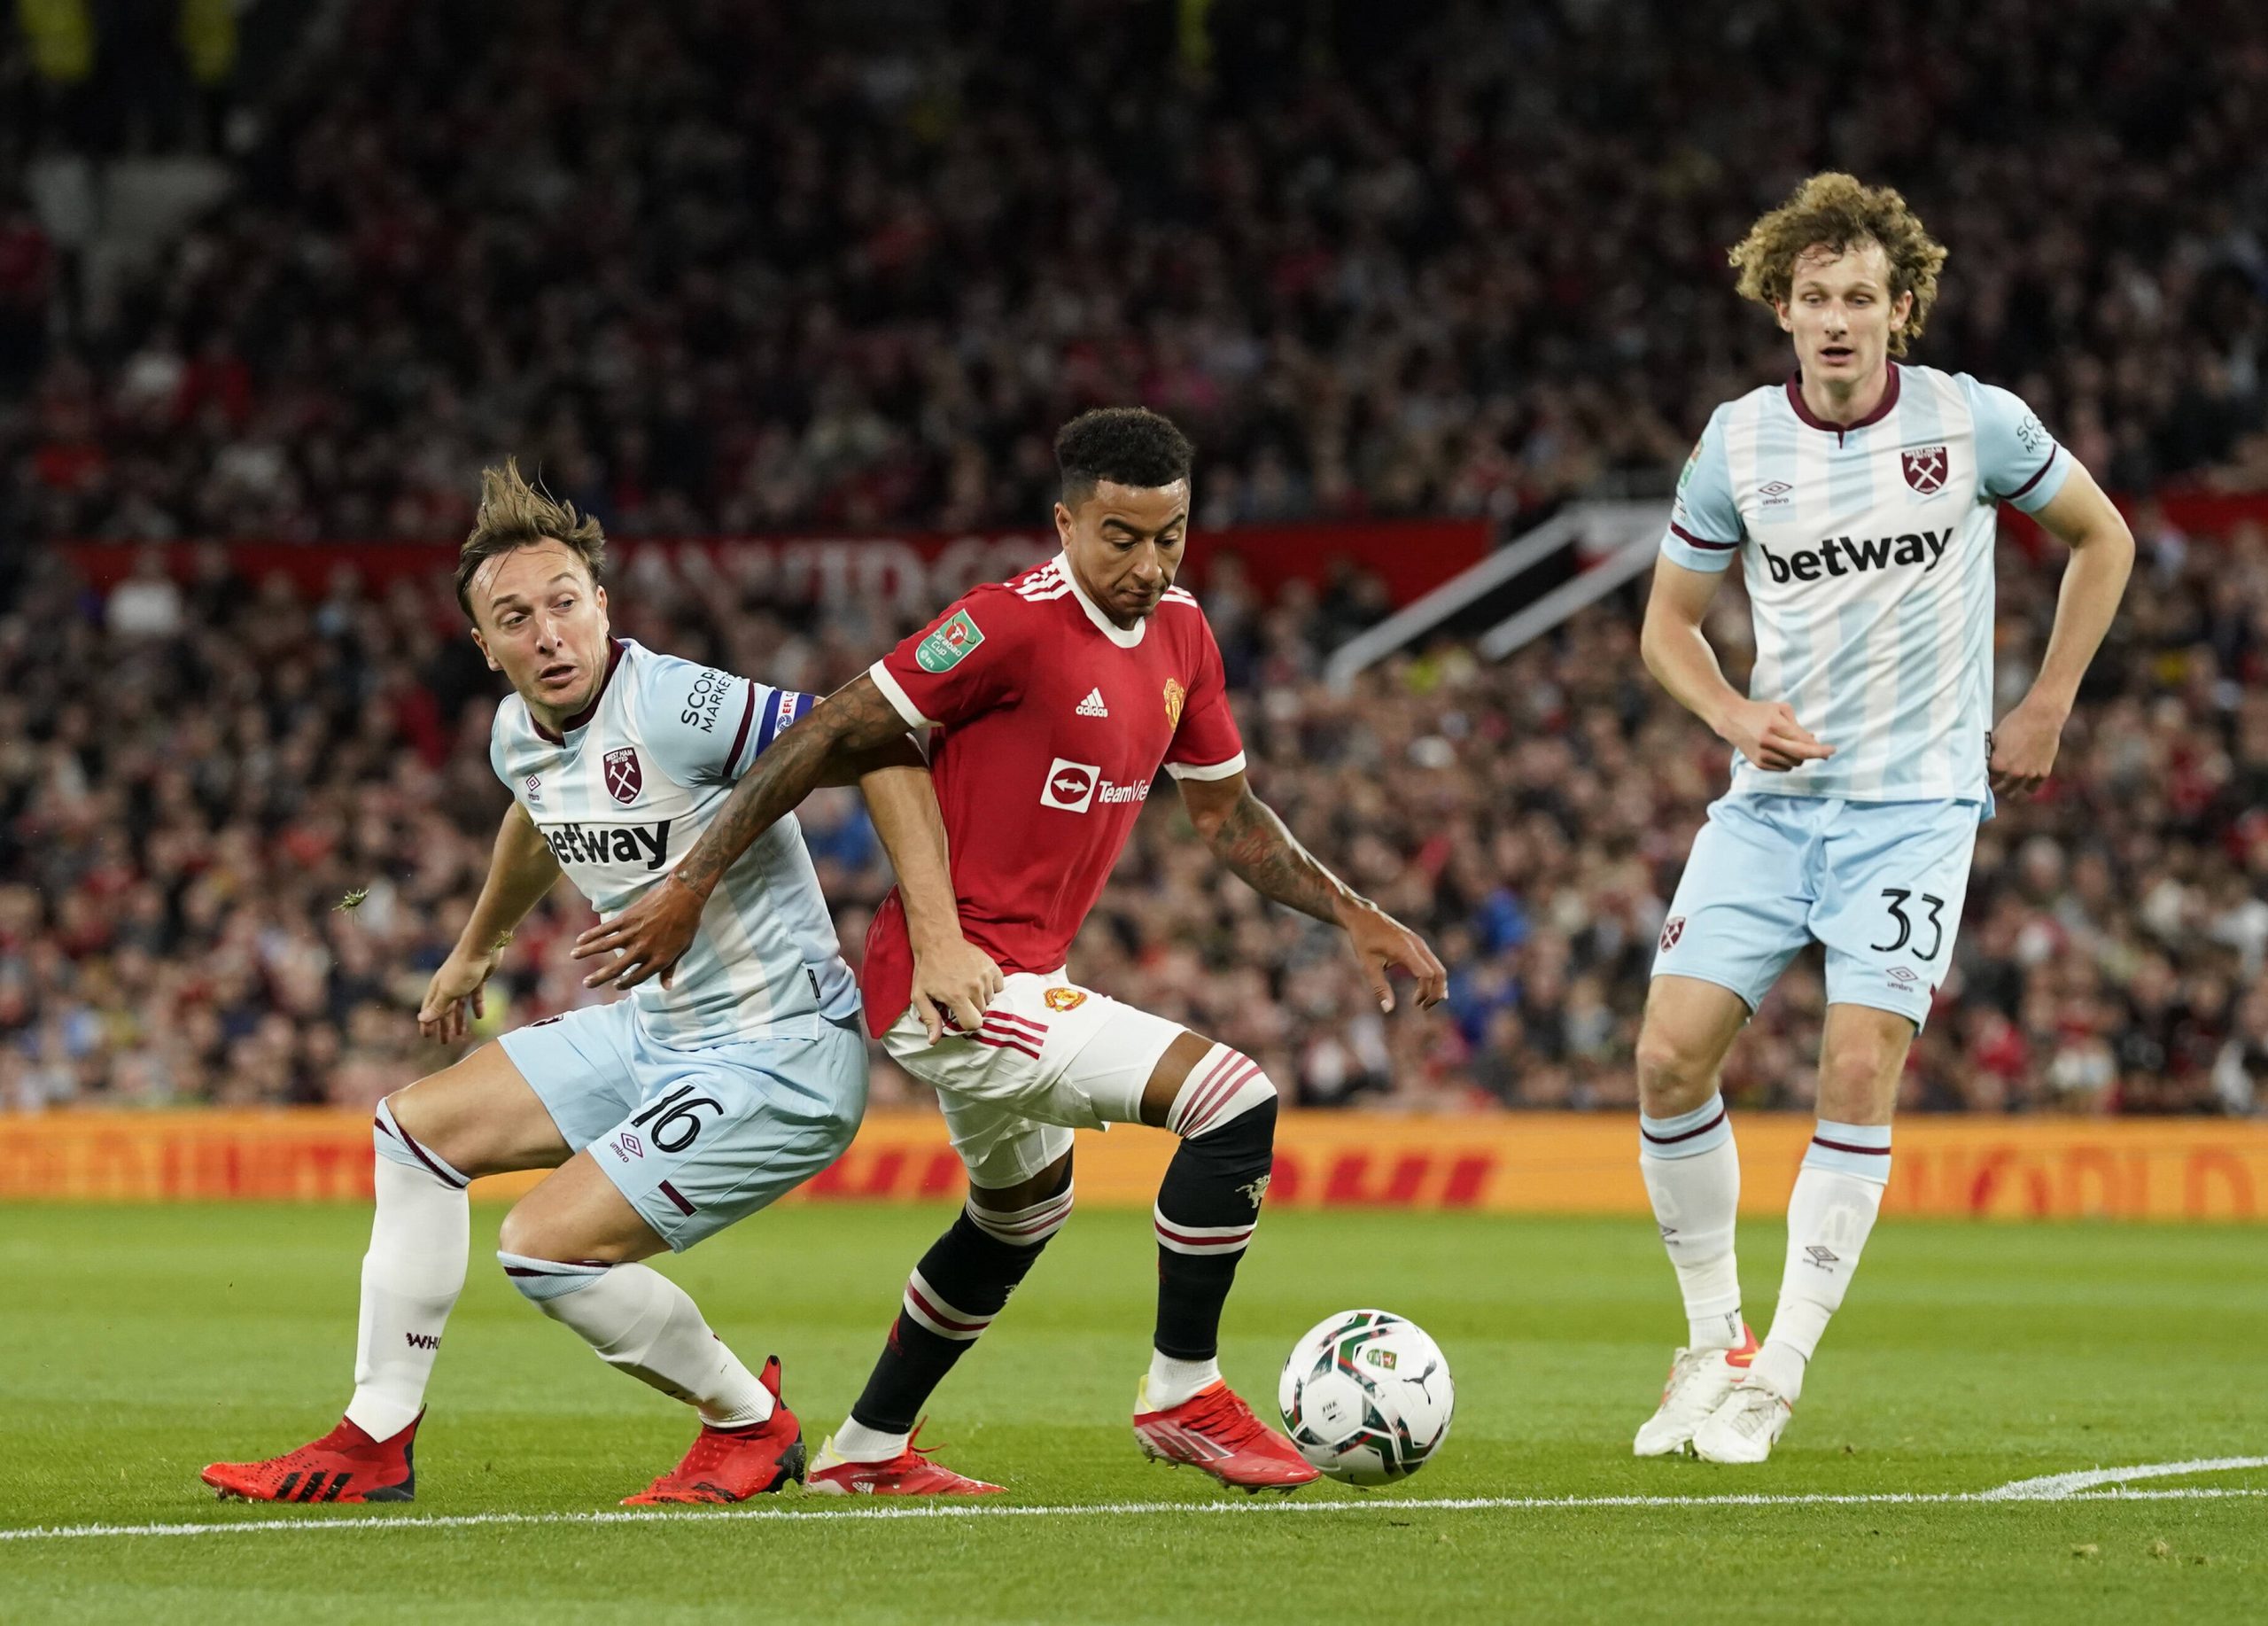 Manchester United star, Jesse Lingard, in action against West Ham United. (Sportimage)